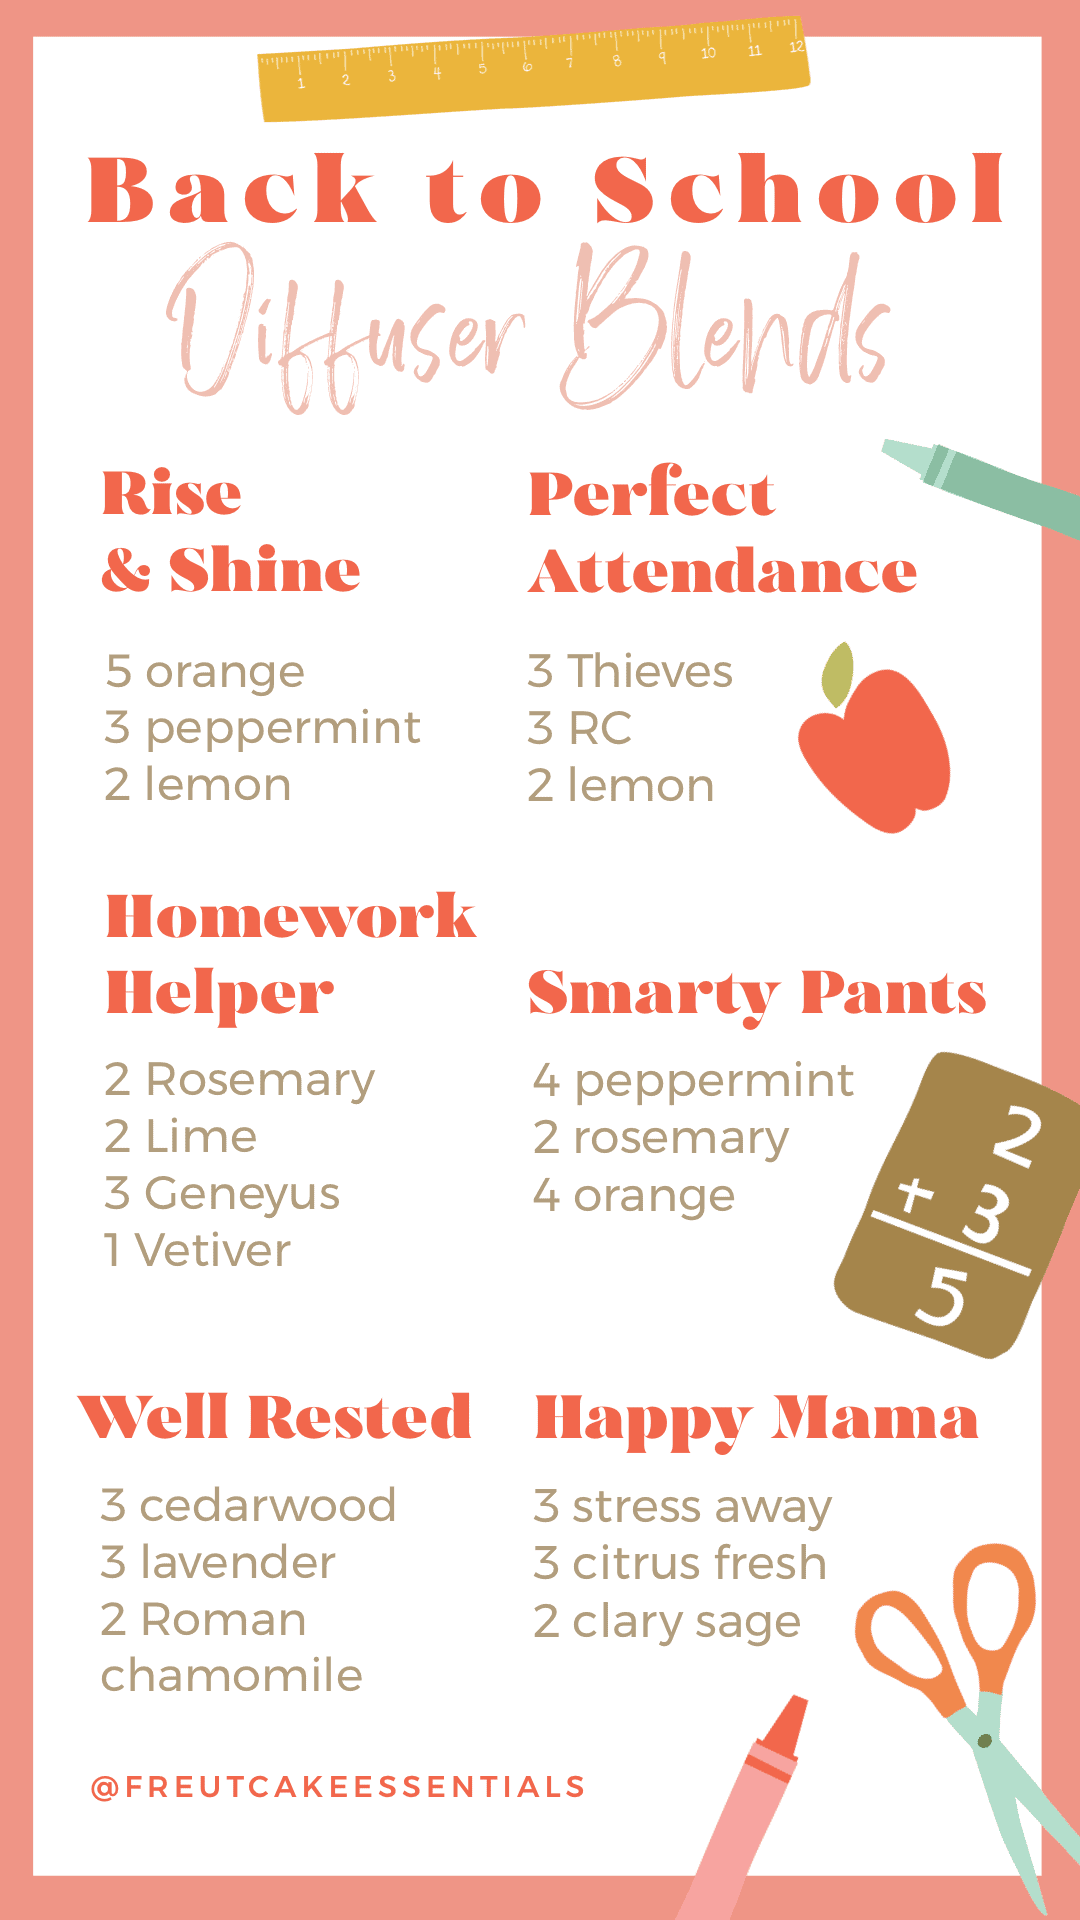 Back to School Diffuser Blends